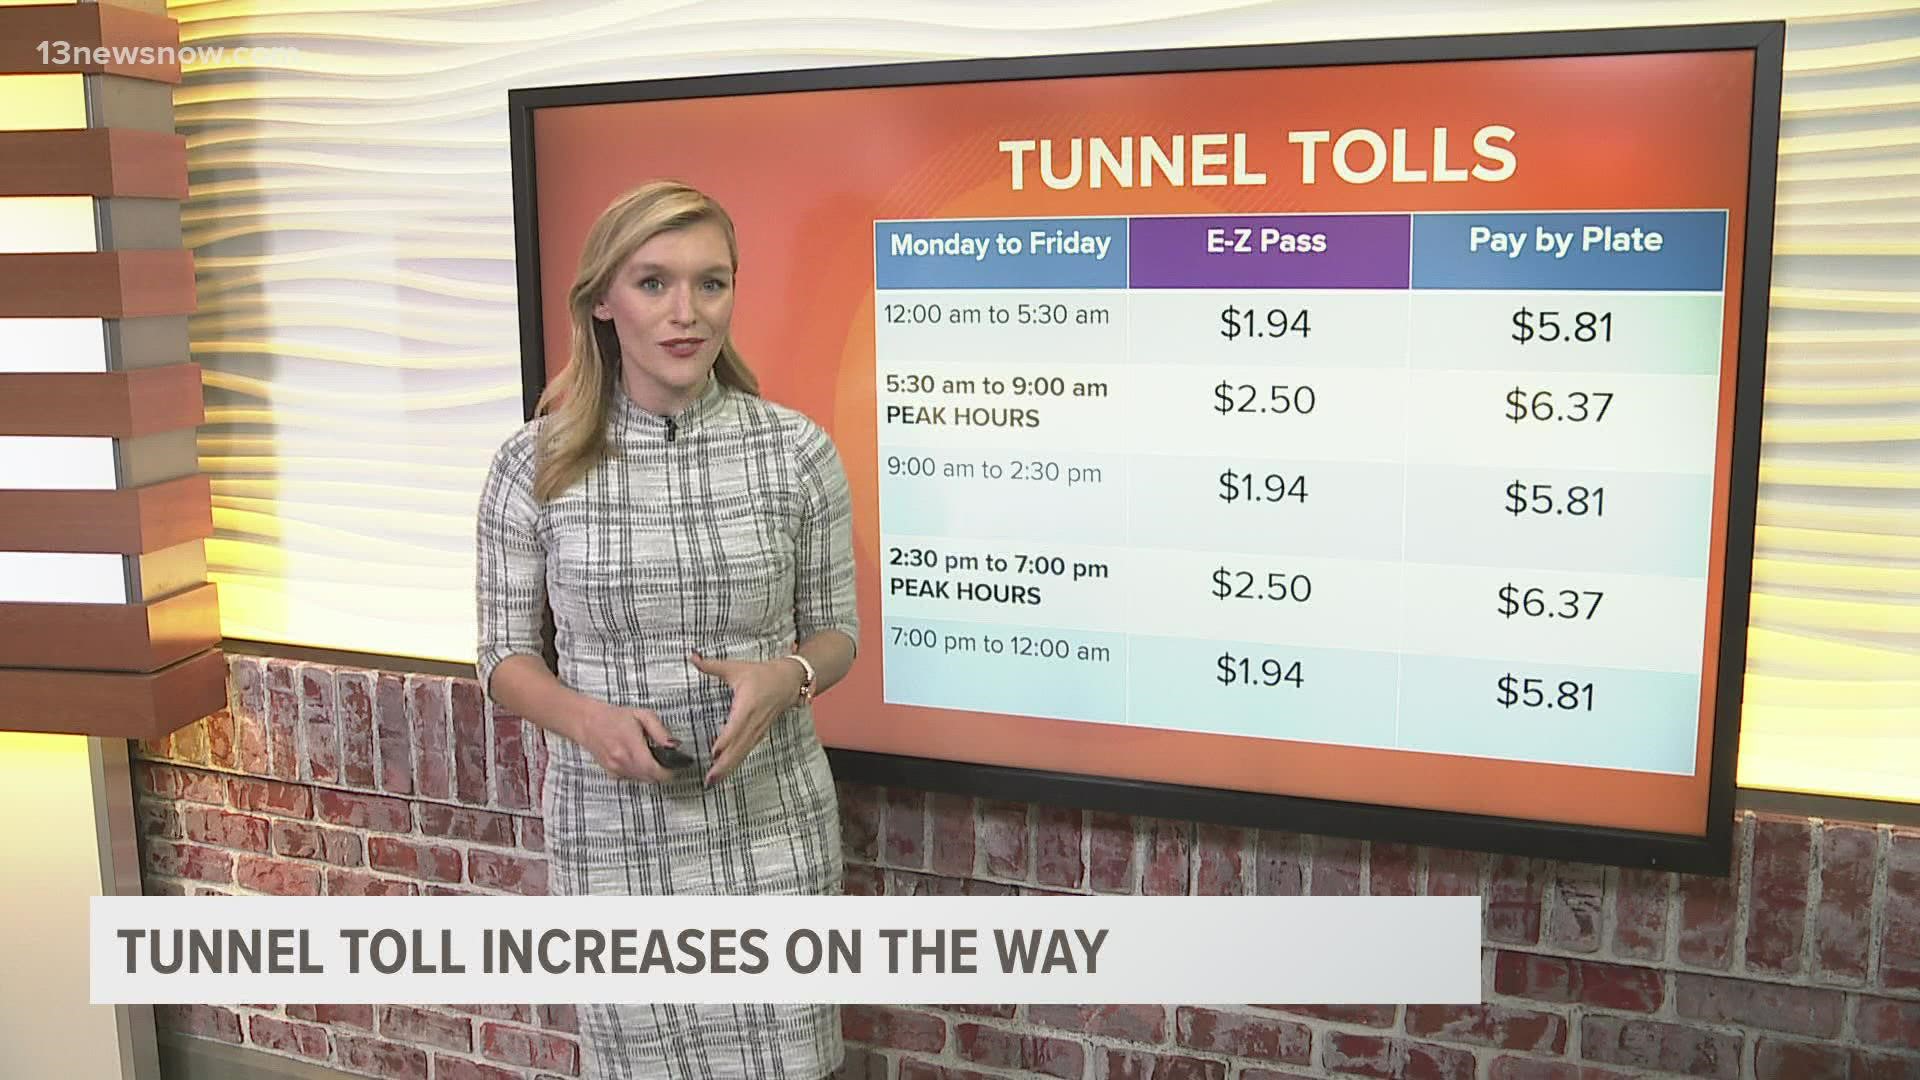 Downtown and Midtown Tunnels tolls going up in 2022